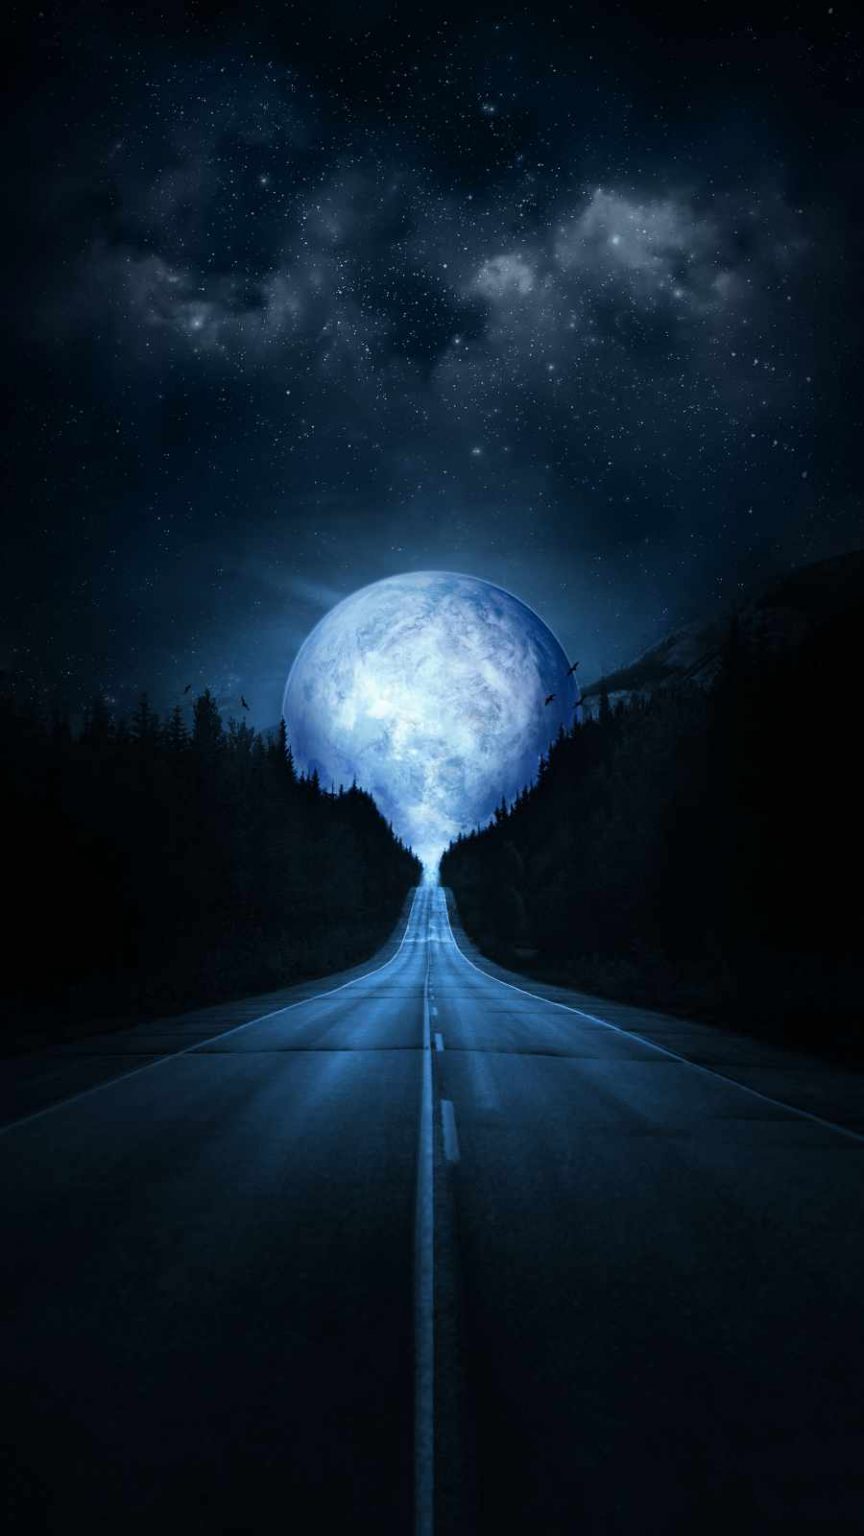 Road To Moon IPhone Wallpaper - IPhone Wallpapers : iPhone Wallpapers